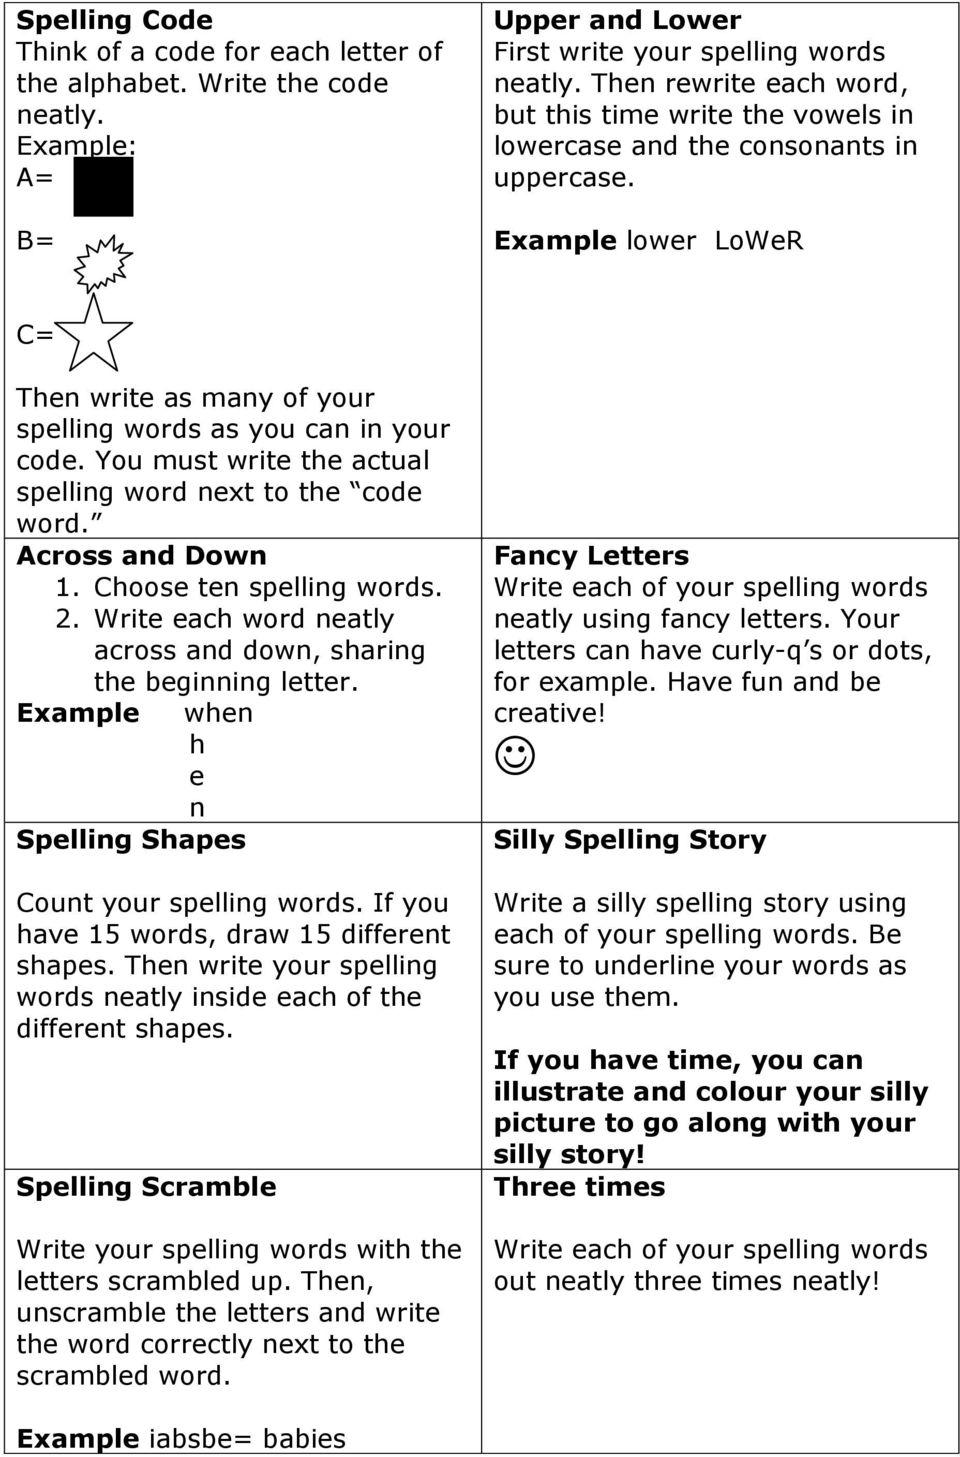 You must write the actual spelling word next to the code word. Across and Down 1. Choose ten spelling words. 2. Write each word neatly across and down, sharing the beginning letter.